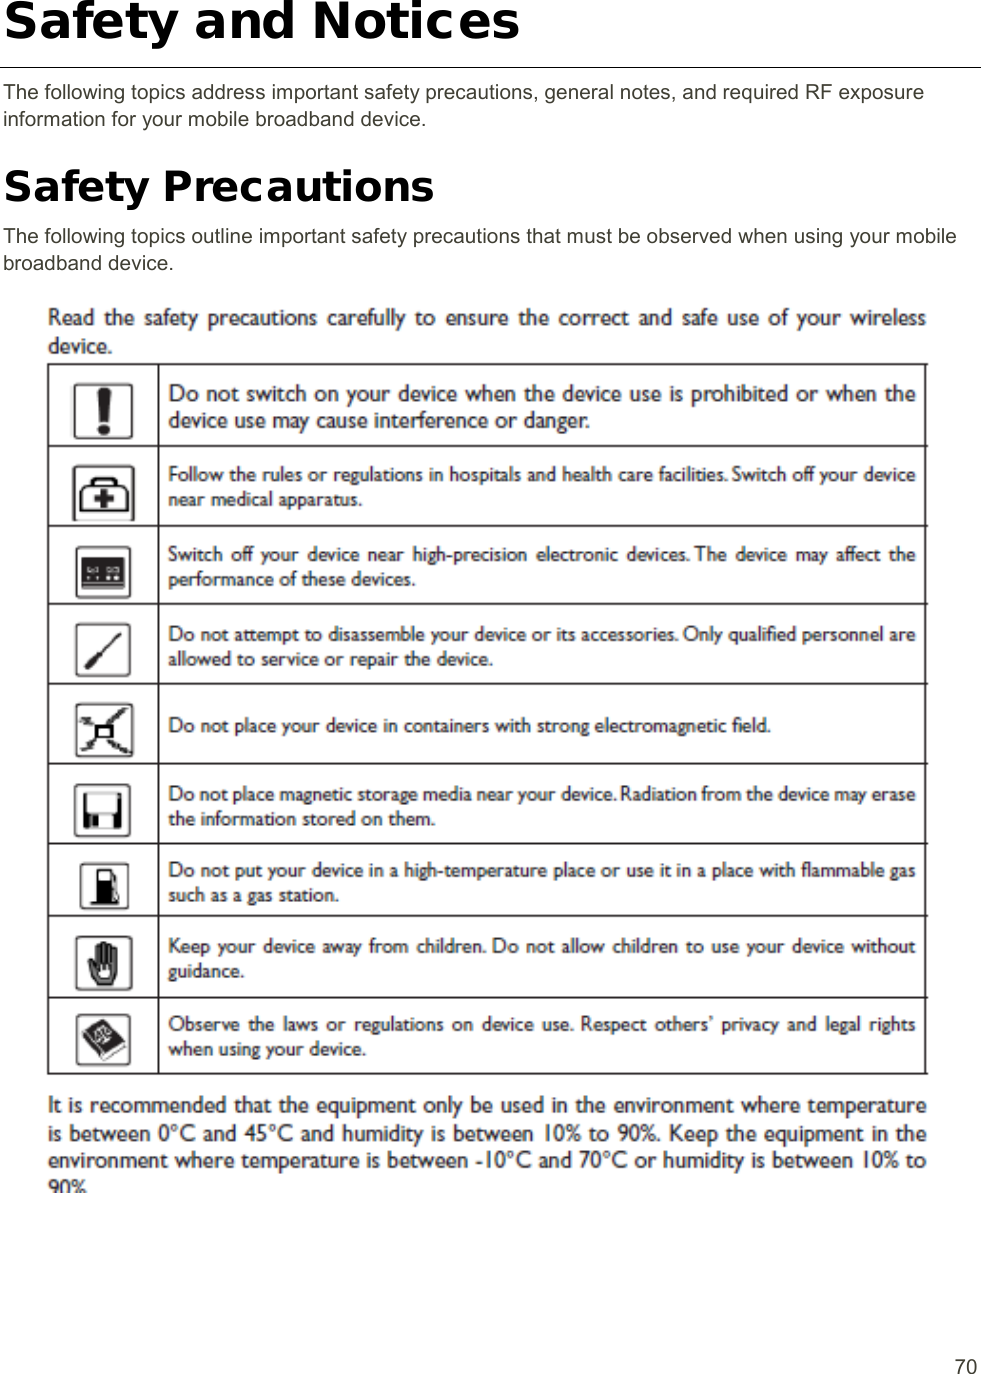  70 Safety and Notices The following topics address important safety precautions, general notes, and required RF exposure information for your mobile broadband device. Safety Precautions The following topics outline important safety precautions that must be observed when using your mobile broadband device.  